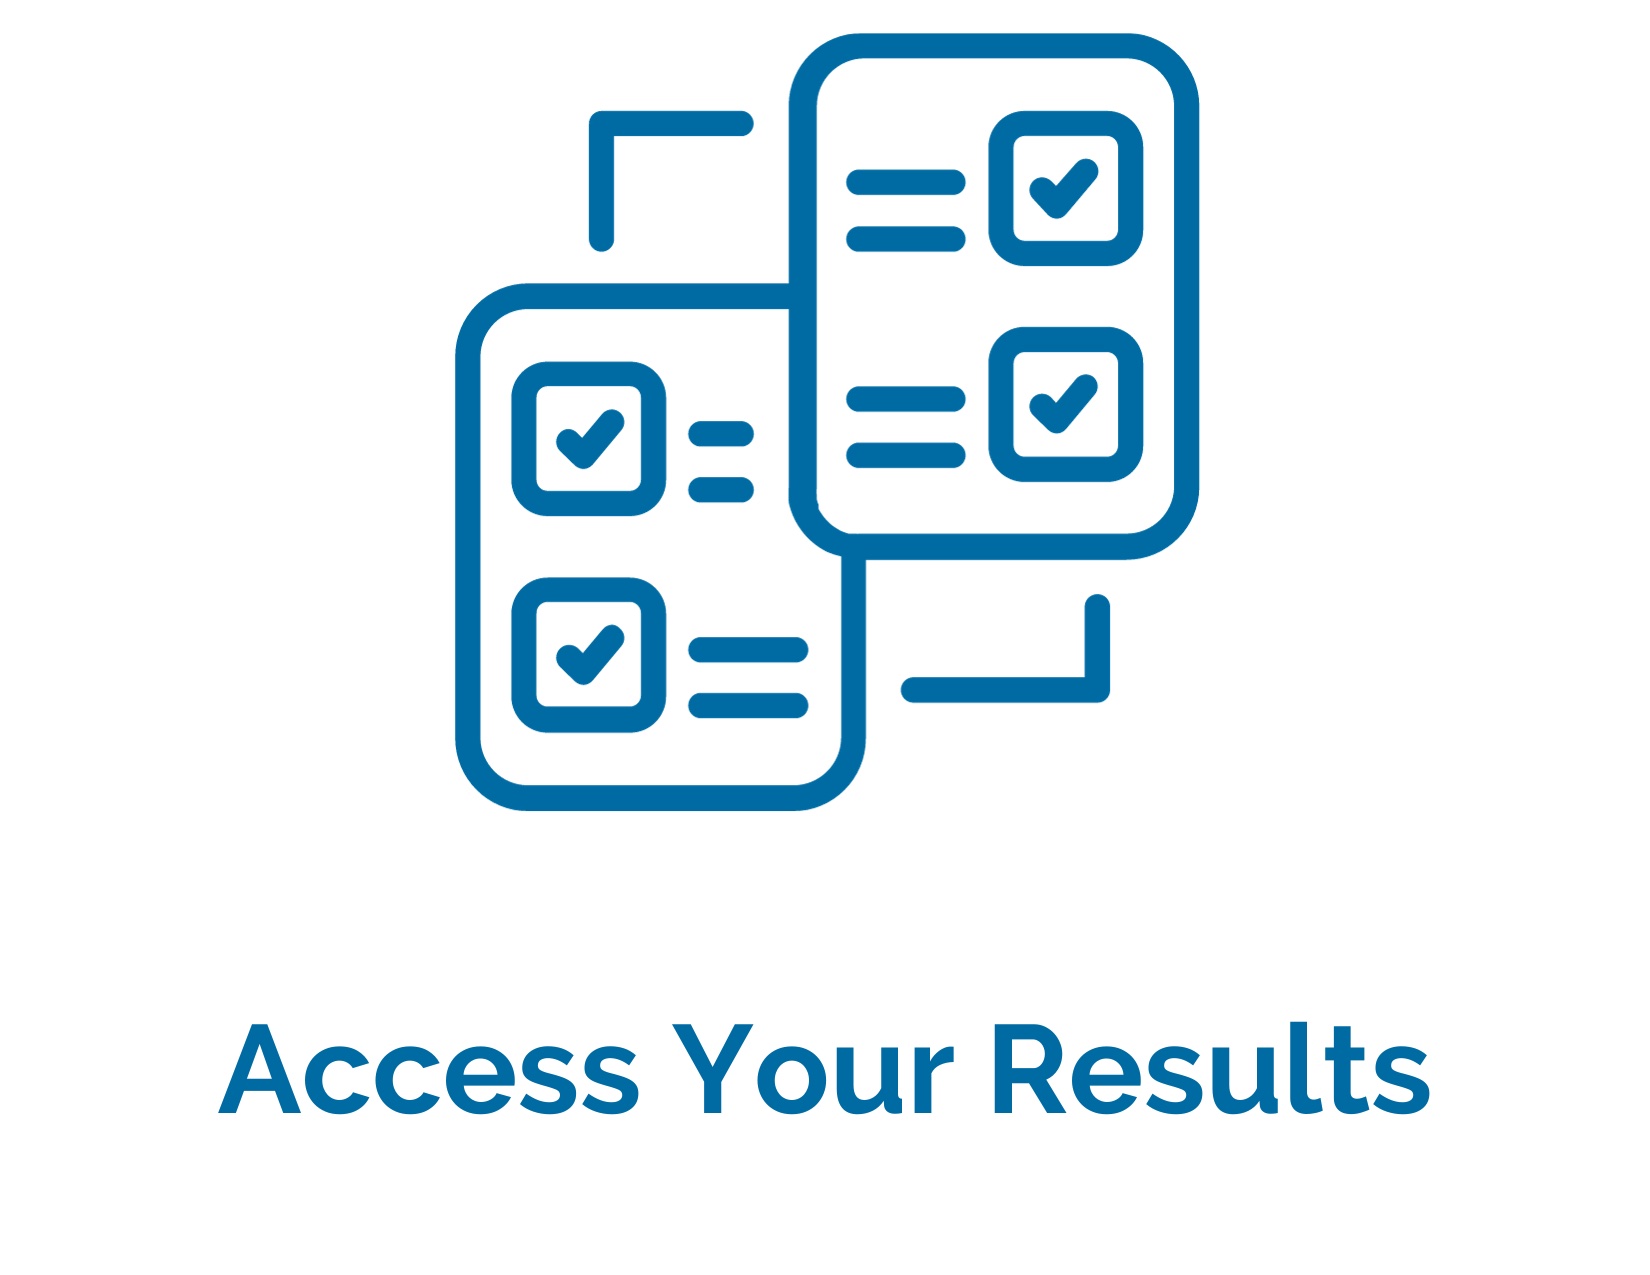 Access Your Results new